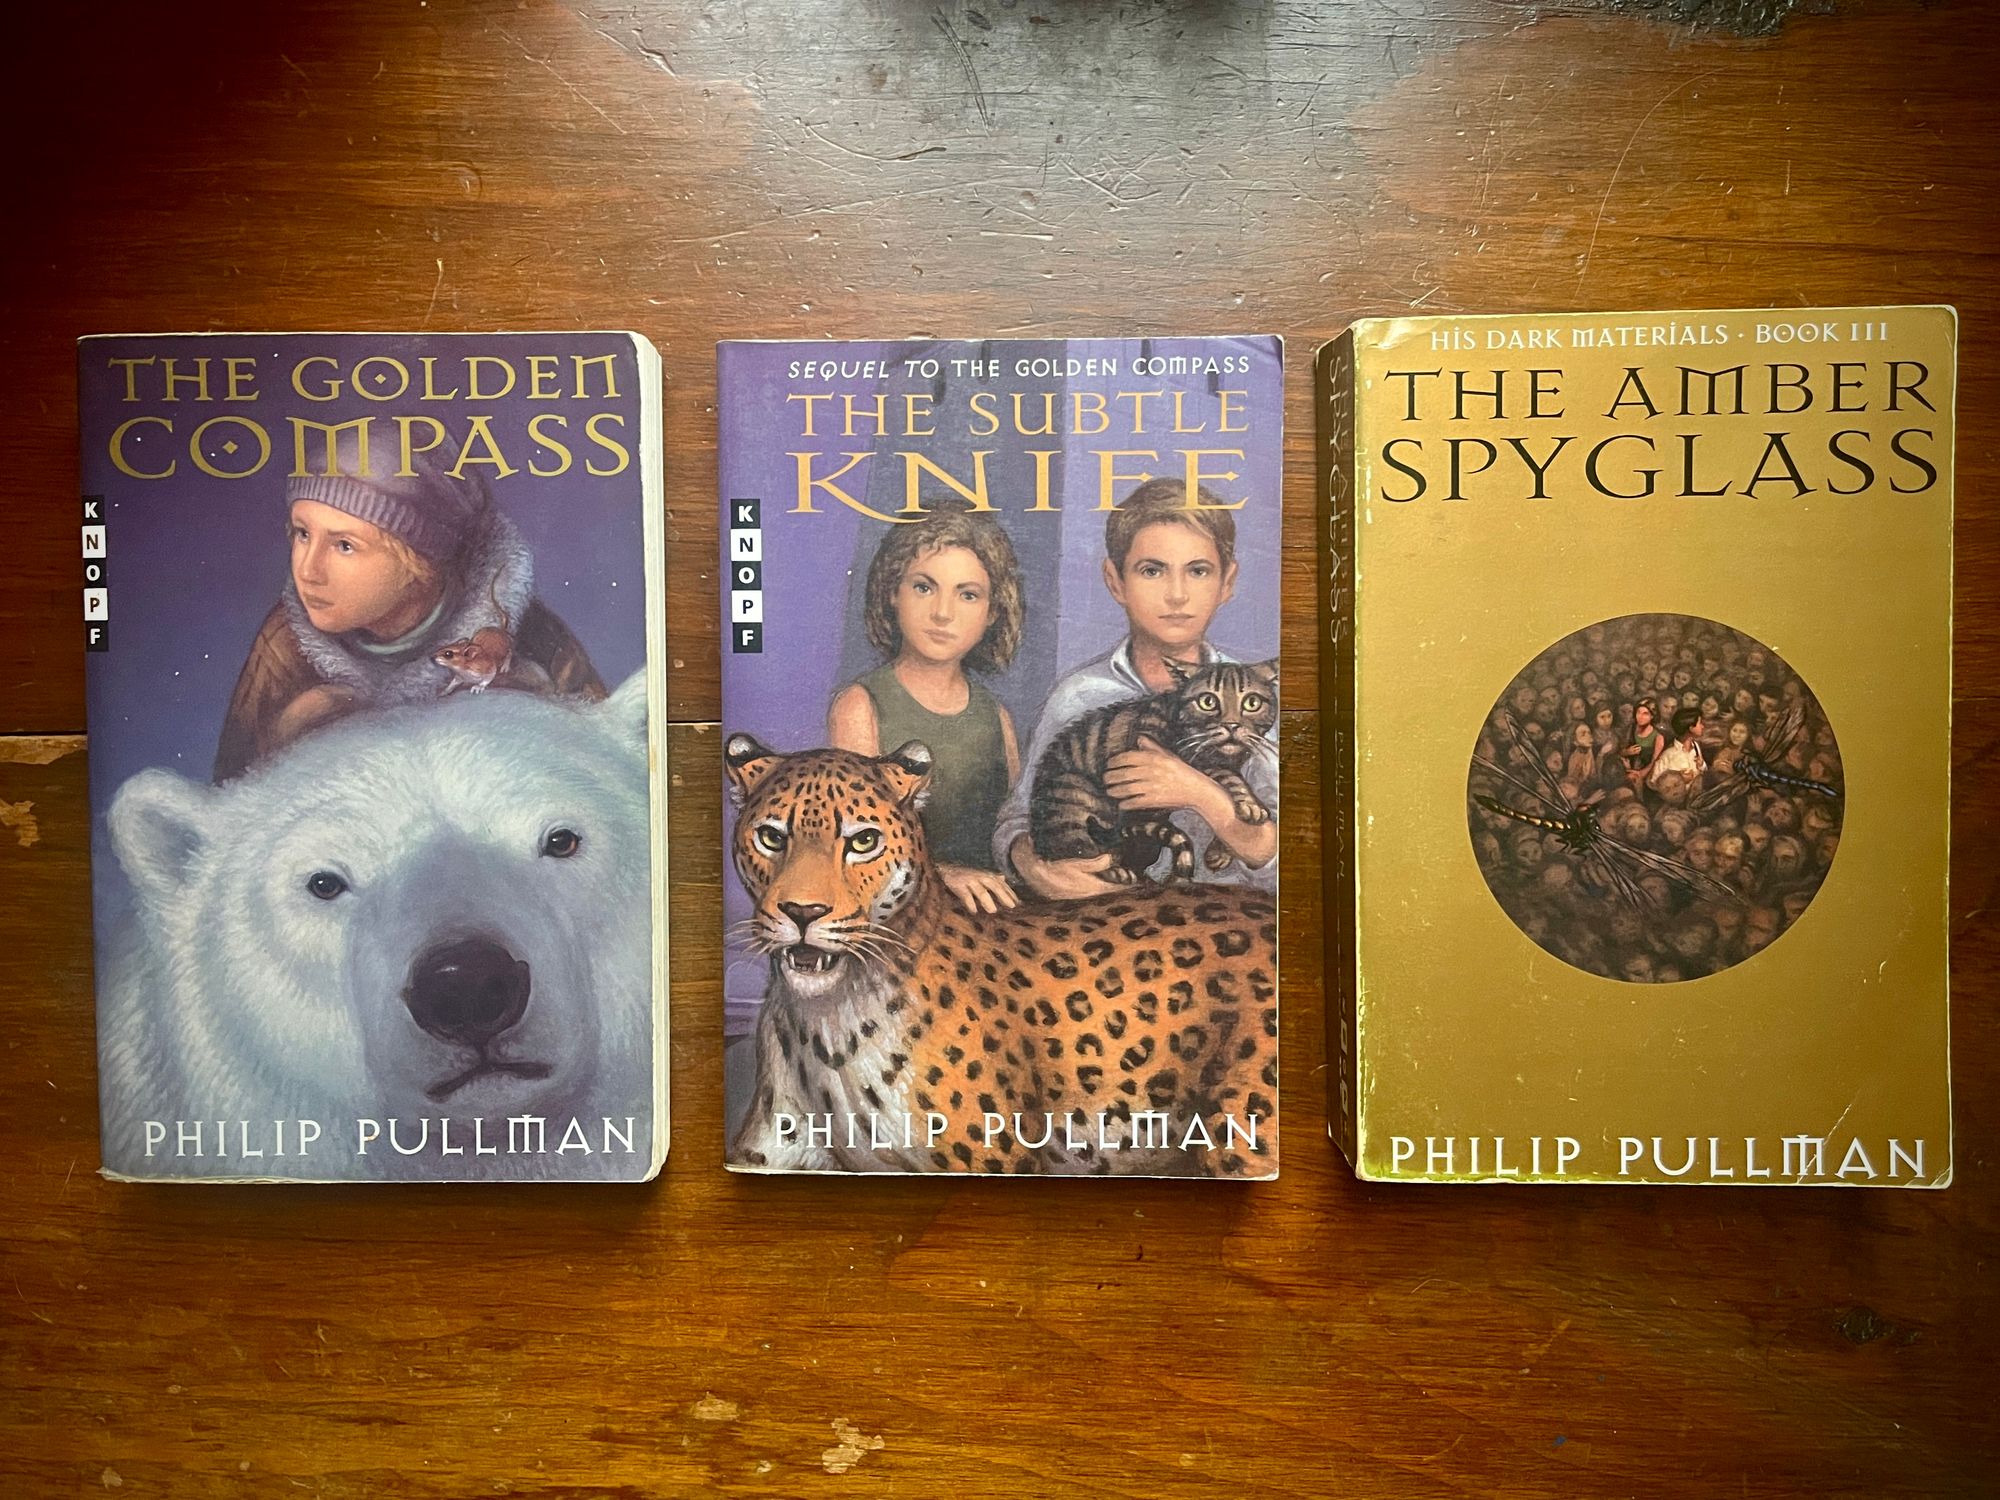 Three novels on a table: The Golden Compass, The Subtle Knife, and The Amber Spyglass.